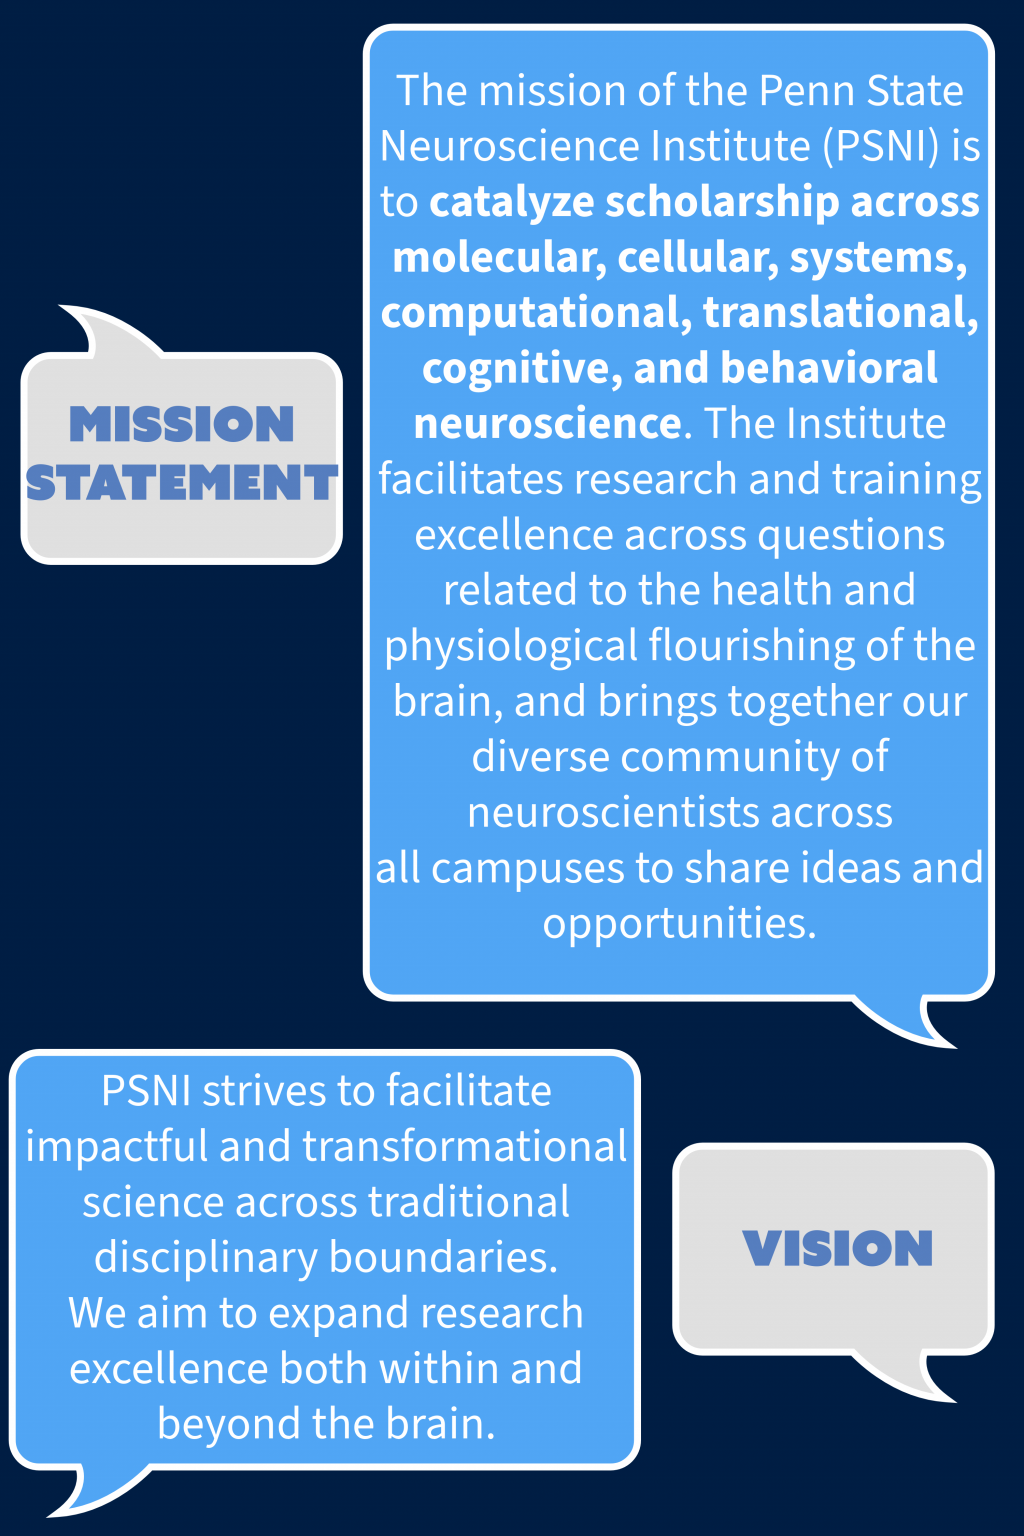 Mission statement: The mission of the Penn State Neuroscience Institute (PSNI) is to catalyze scholarship across molecular, cellular, systems, computational, translational, cognitive, and behavioral neuroscience. The Institute facilitates research and training excellence across questions related to the health and physiological flourishing of the brain, and brings together our diverse community of neuroscientists across  all campuses to share ideas and opportunities.     Vision statement: PSNI strives to facilitate impactful and transformational science across traditional disciplinary boundaries.  We aim to expand research excellence both within and beyond the brain.